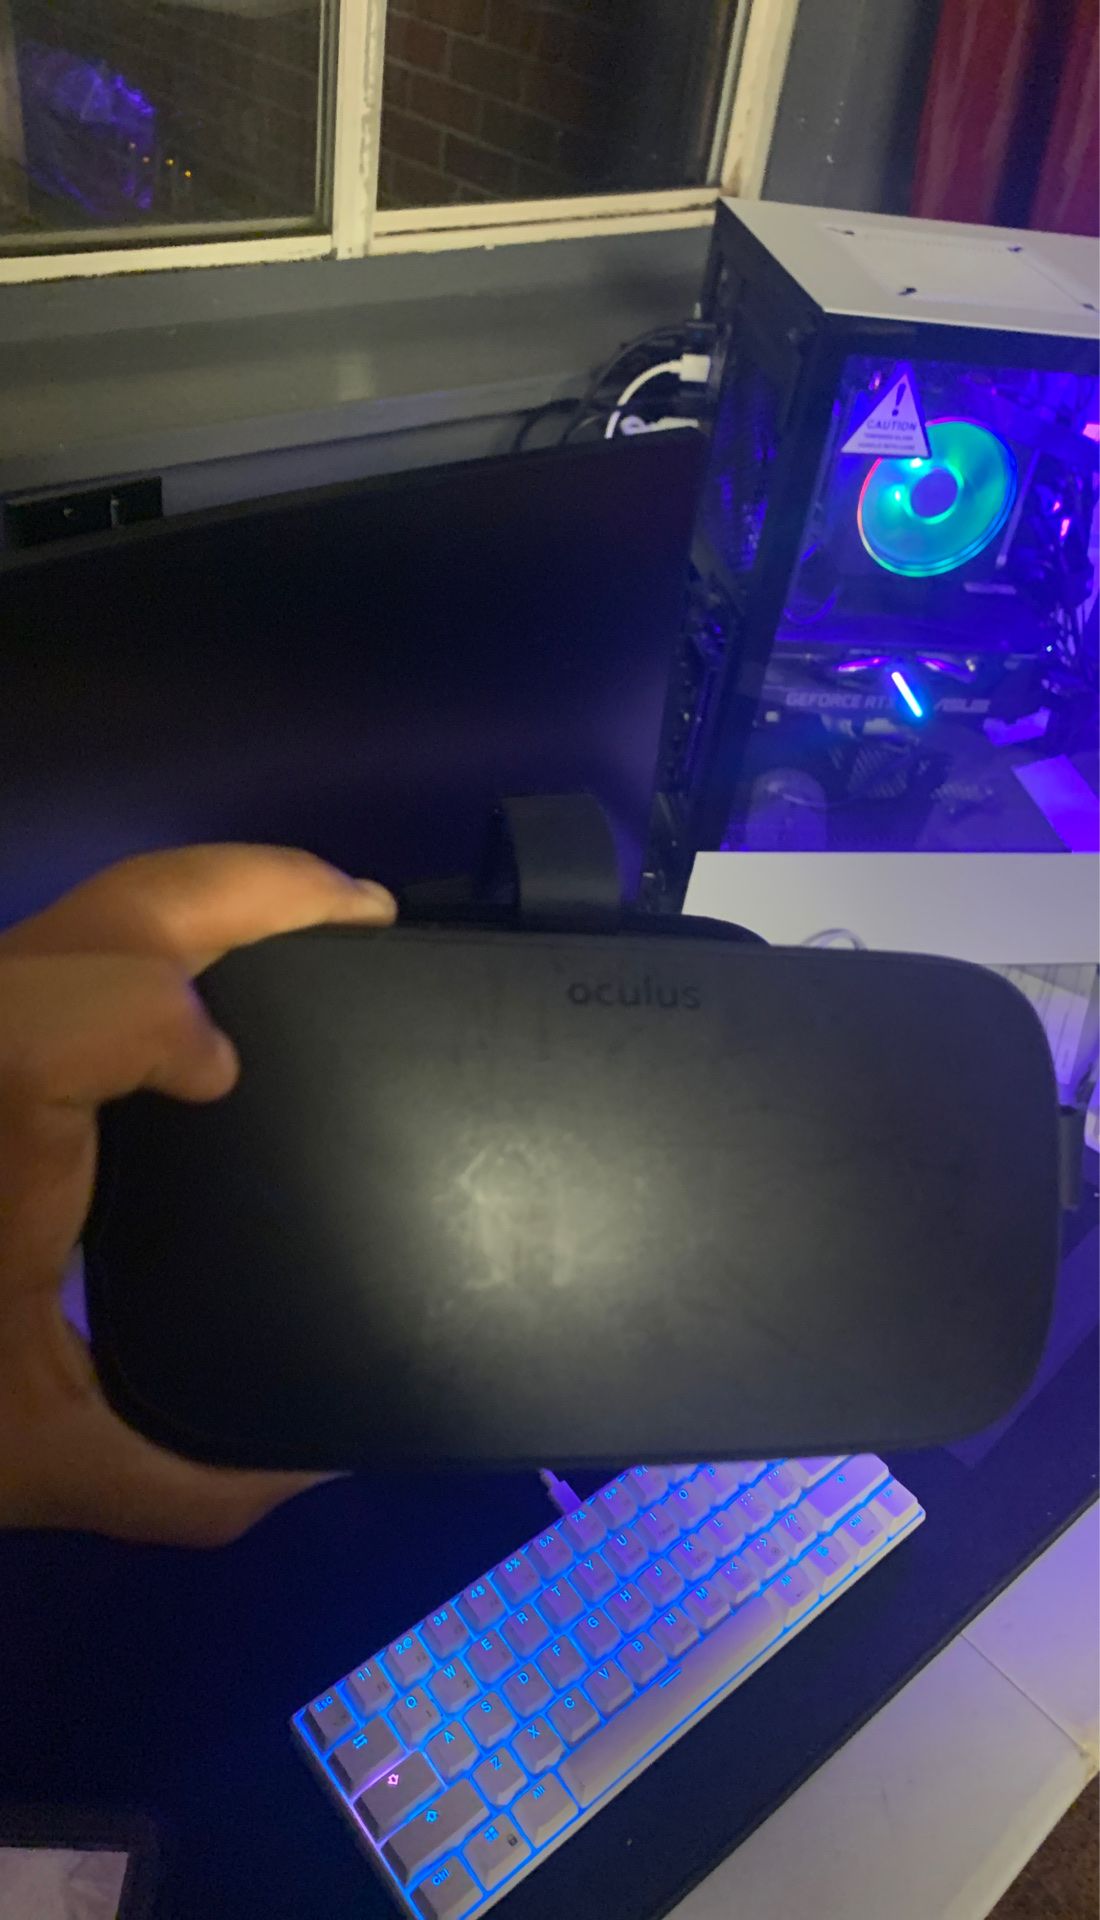 Oculus rift + touch works perfectly